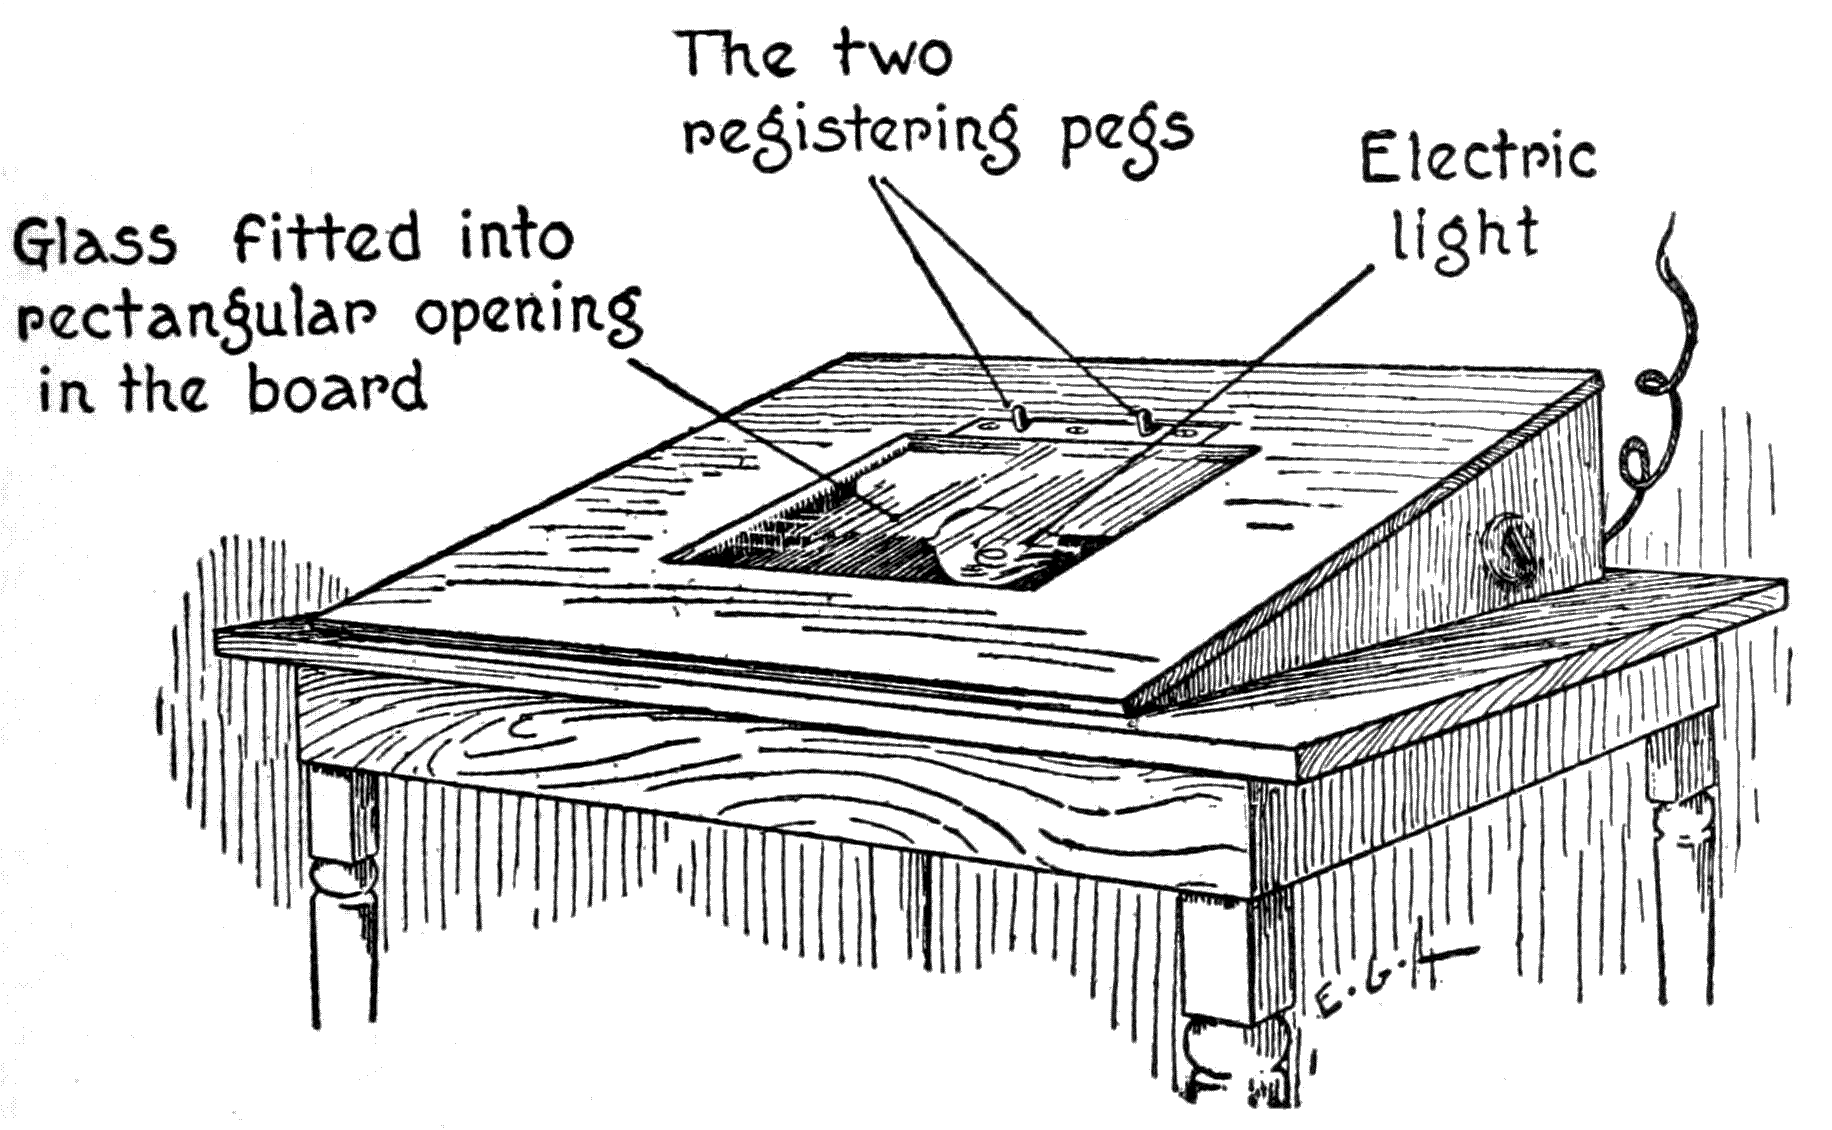 Glass fitted into rectangular  opening in the board; The two registering pegs; Electric light